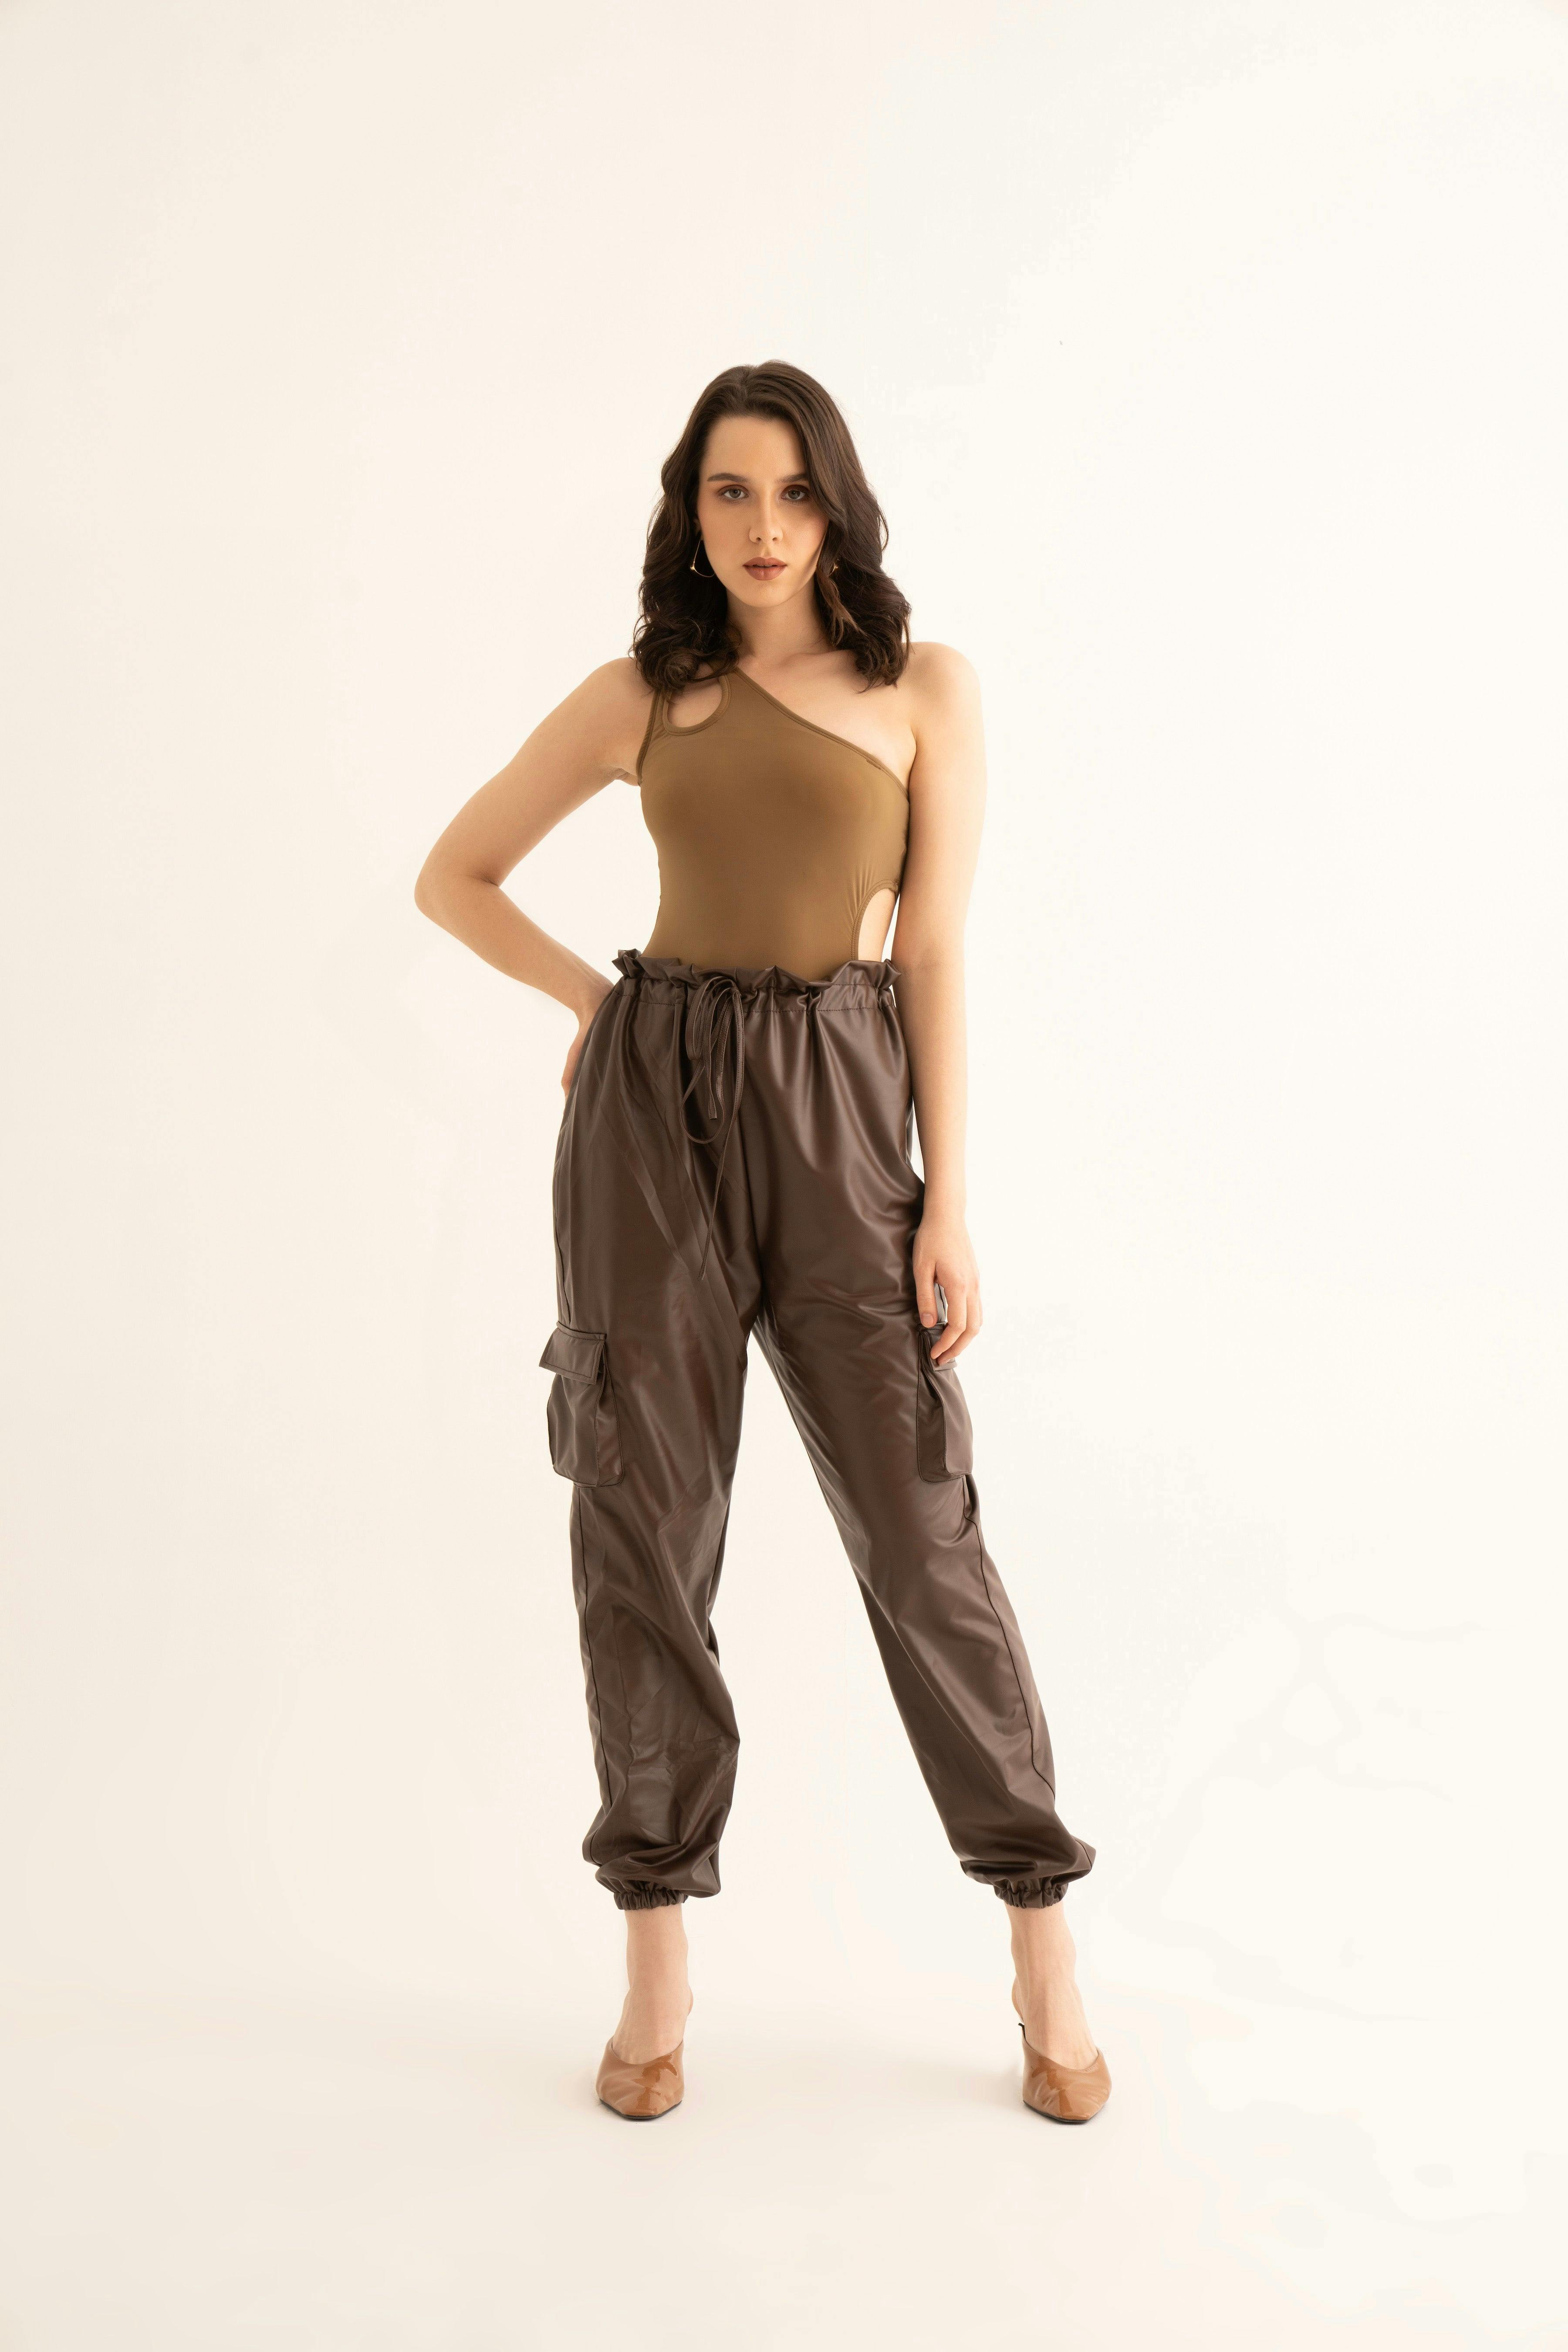 Brown Faux Leather Cargo Pants, a product by Torqadorn